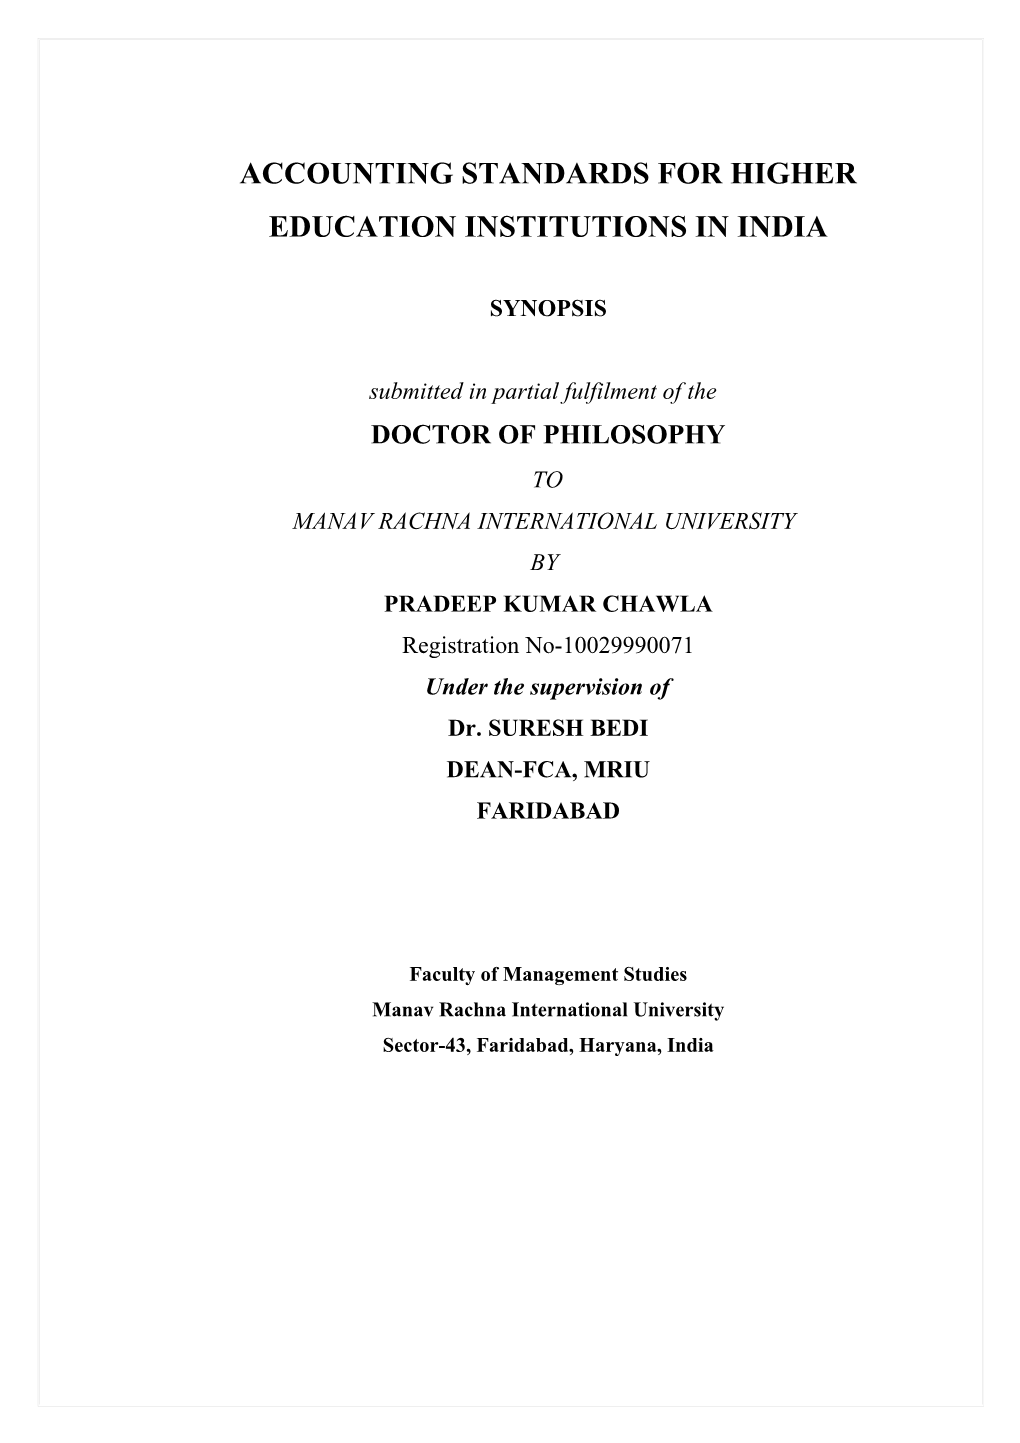 Accounting Standards for Higher Education Institutions in India